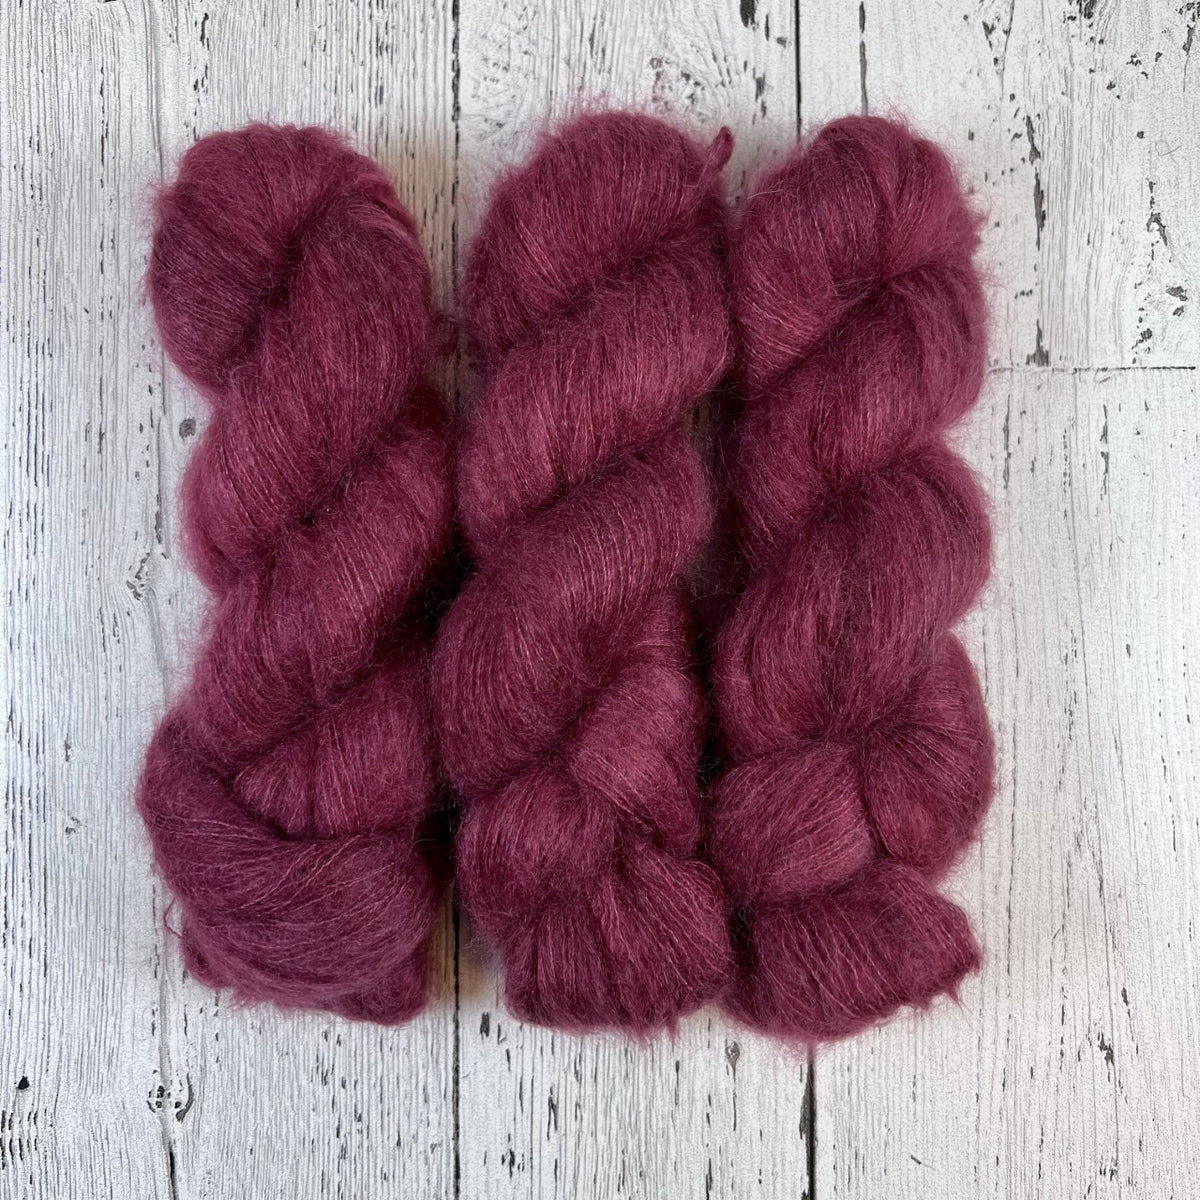 Cranberry - Delicacy Lace - Dyed Stock